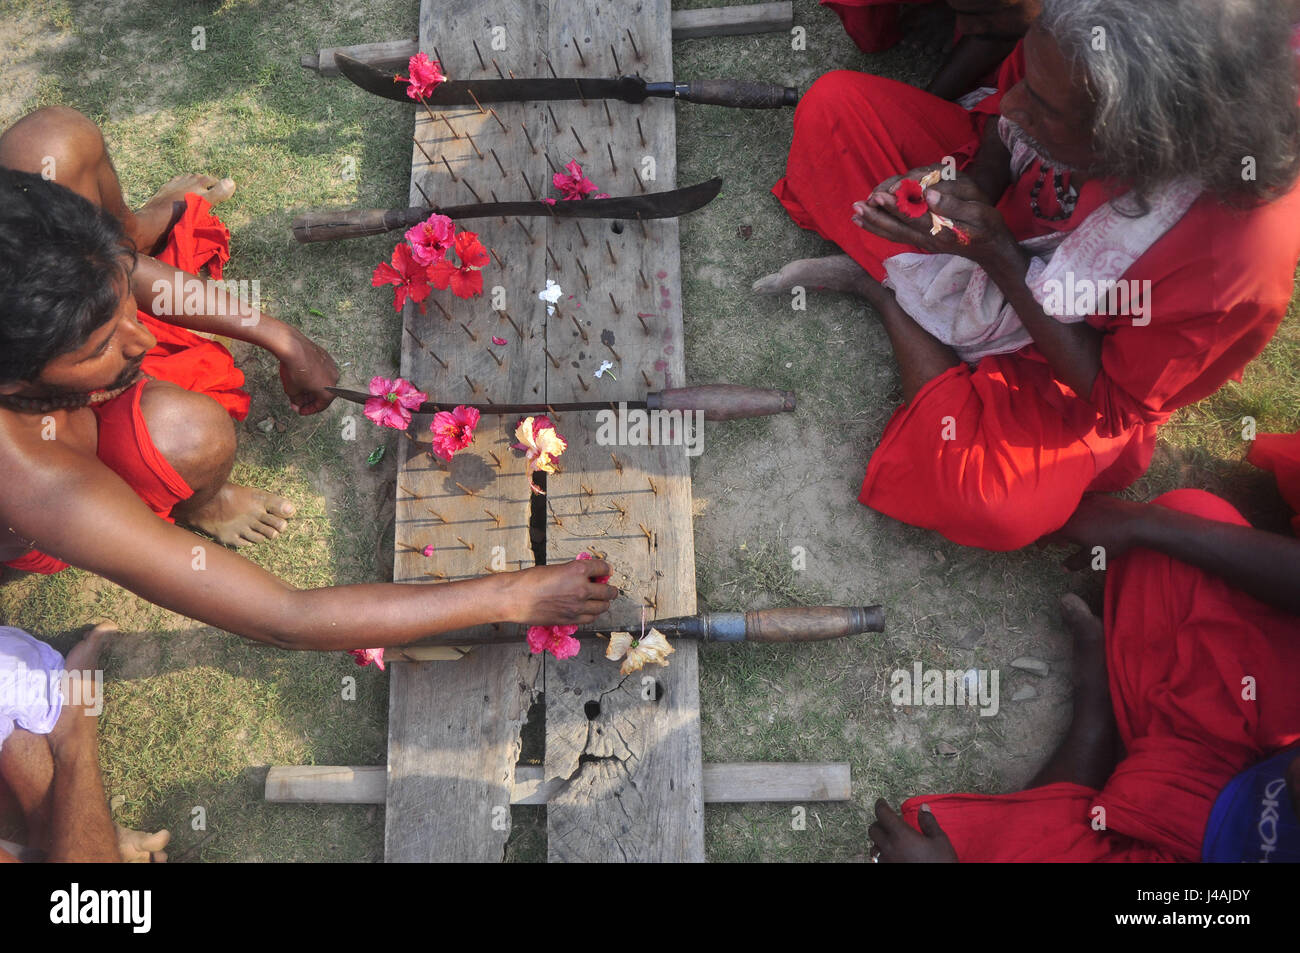 Abhisek Saha / Le Pictorium -  the Festival of Charak is celebrated in the rural areas of Tripura in India -  14/04/2017  -  India / Tripura / Agartala  -  INDIA,TRIPURA-APRIL 14:A Hindu priest is performeing the rituals of Charak Puja  in the outskirts of Agartala, capital of the northeastern state of Tripura.                                                                                   Like every year, the Festival of Charak is celebrated in the rural areas of Tripura on the last day of the Bengali calendar year.The festival which is dedicated to the Hindu deities of Shiva and Sakti invo Stock Photo